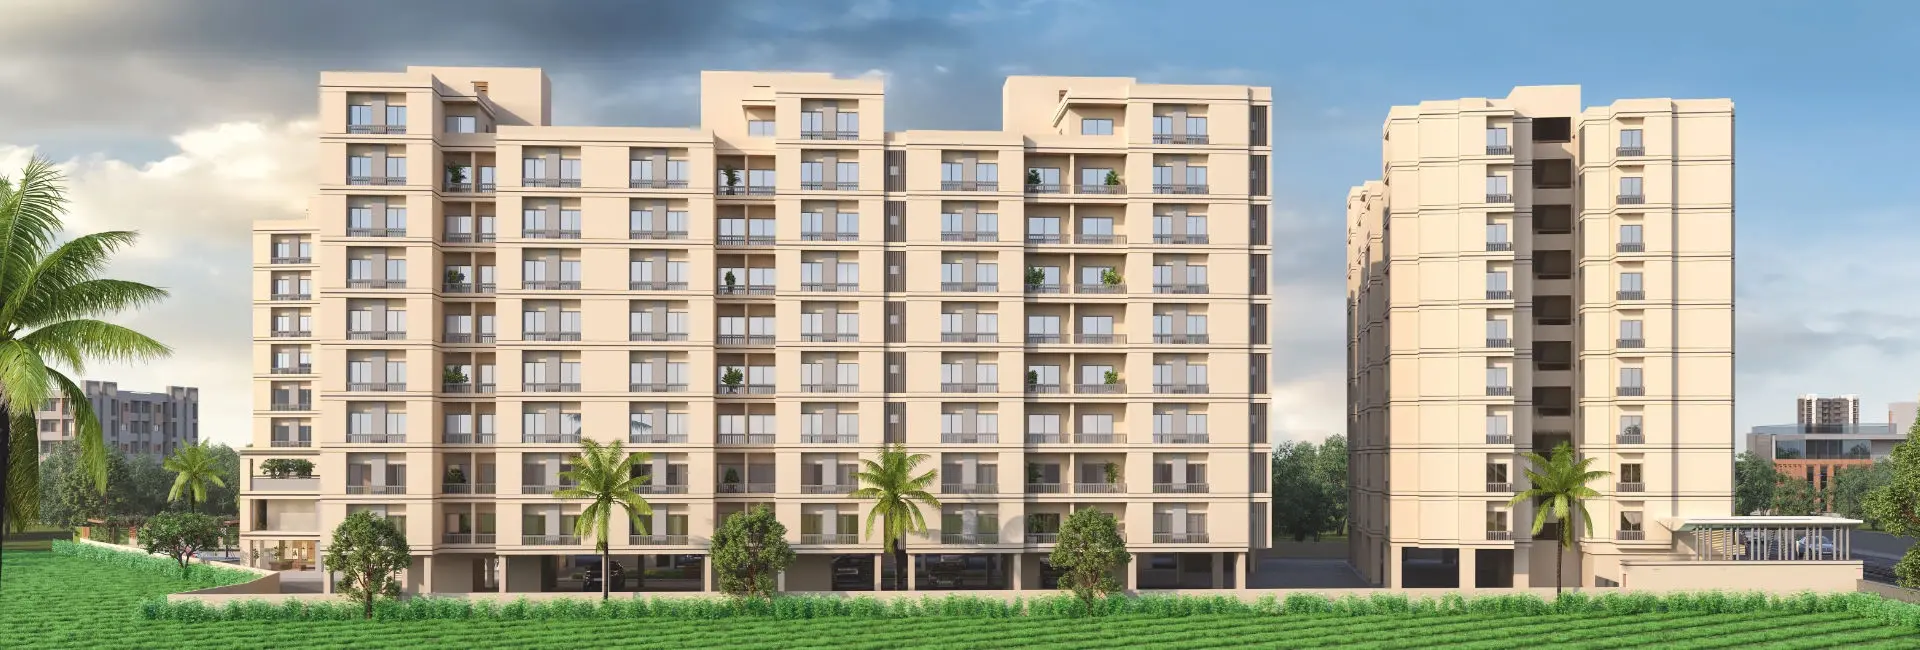 Residential and Commercial building - Shree Siddheshwar Hilltown